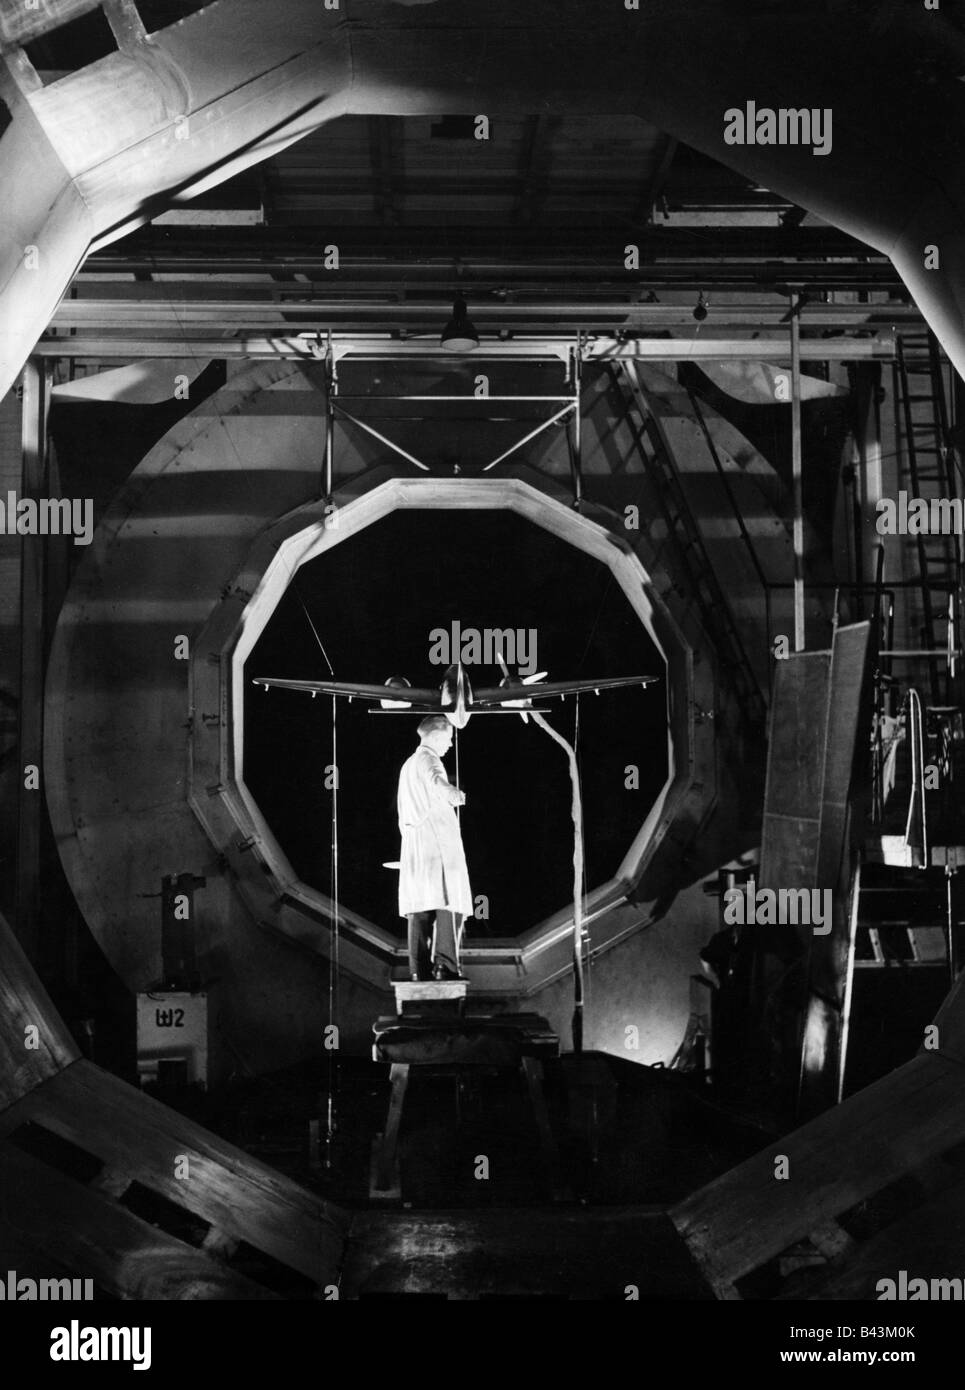 events, Second World War / WWII, Germany, armaments industry, aircraft construction, Junkers works, construction of a Ju 88 bomber in a wind tunnel, June 1941, Stock Photo